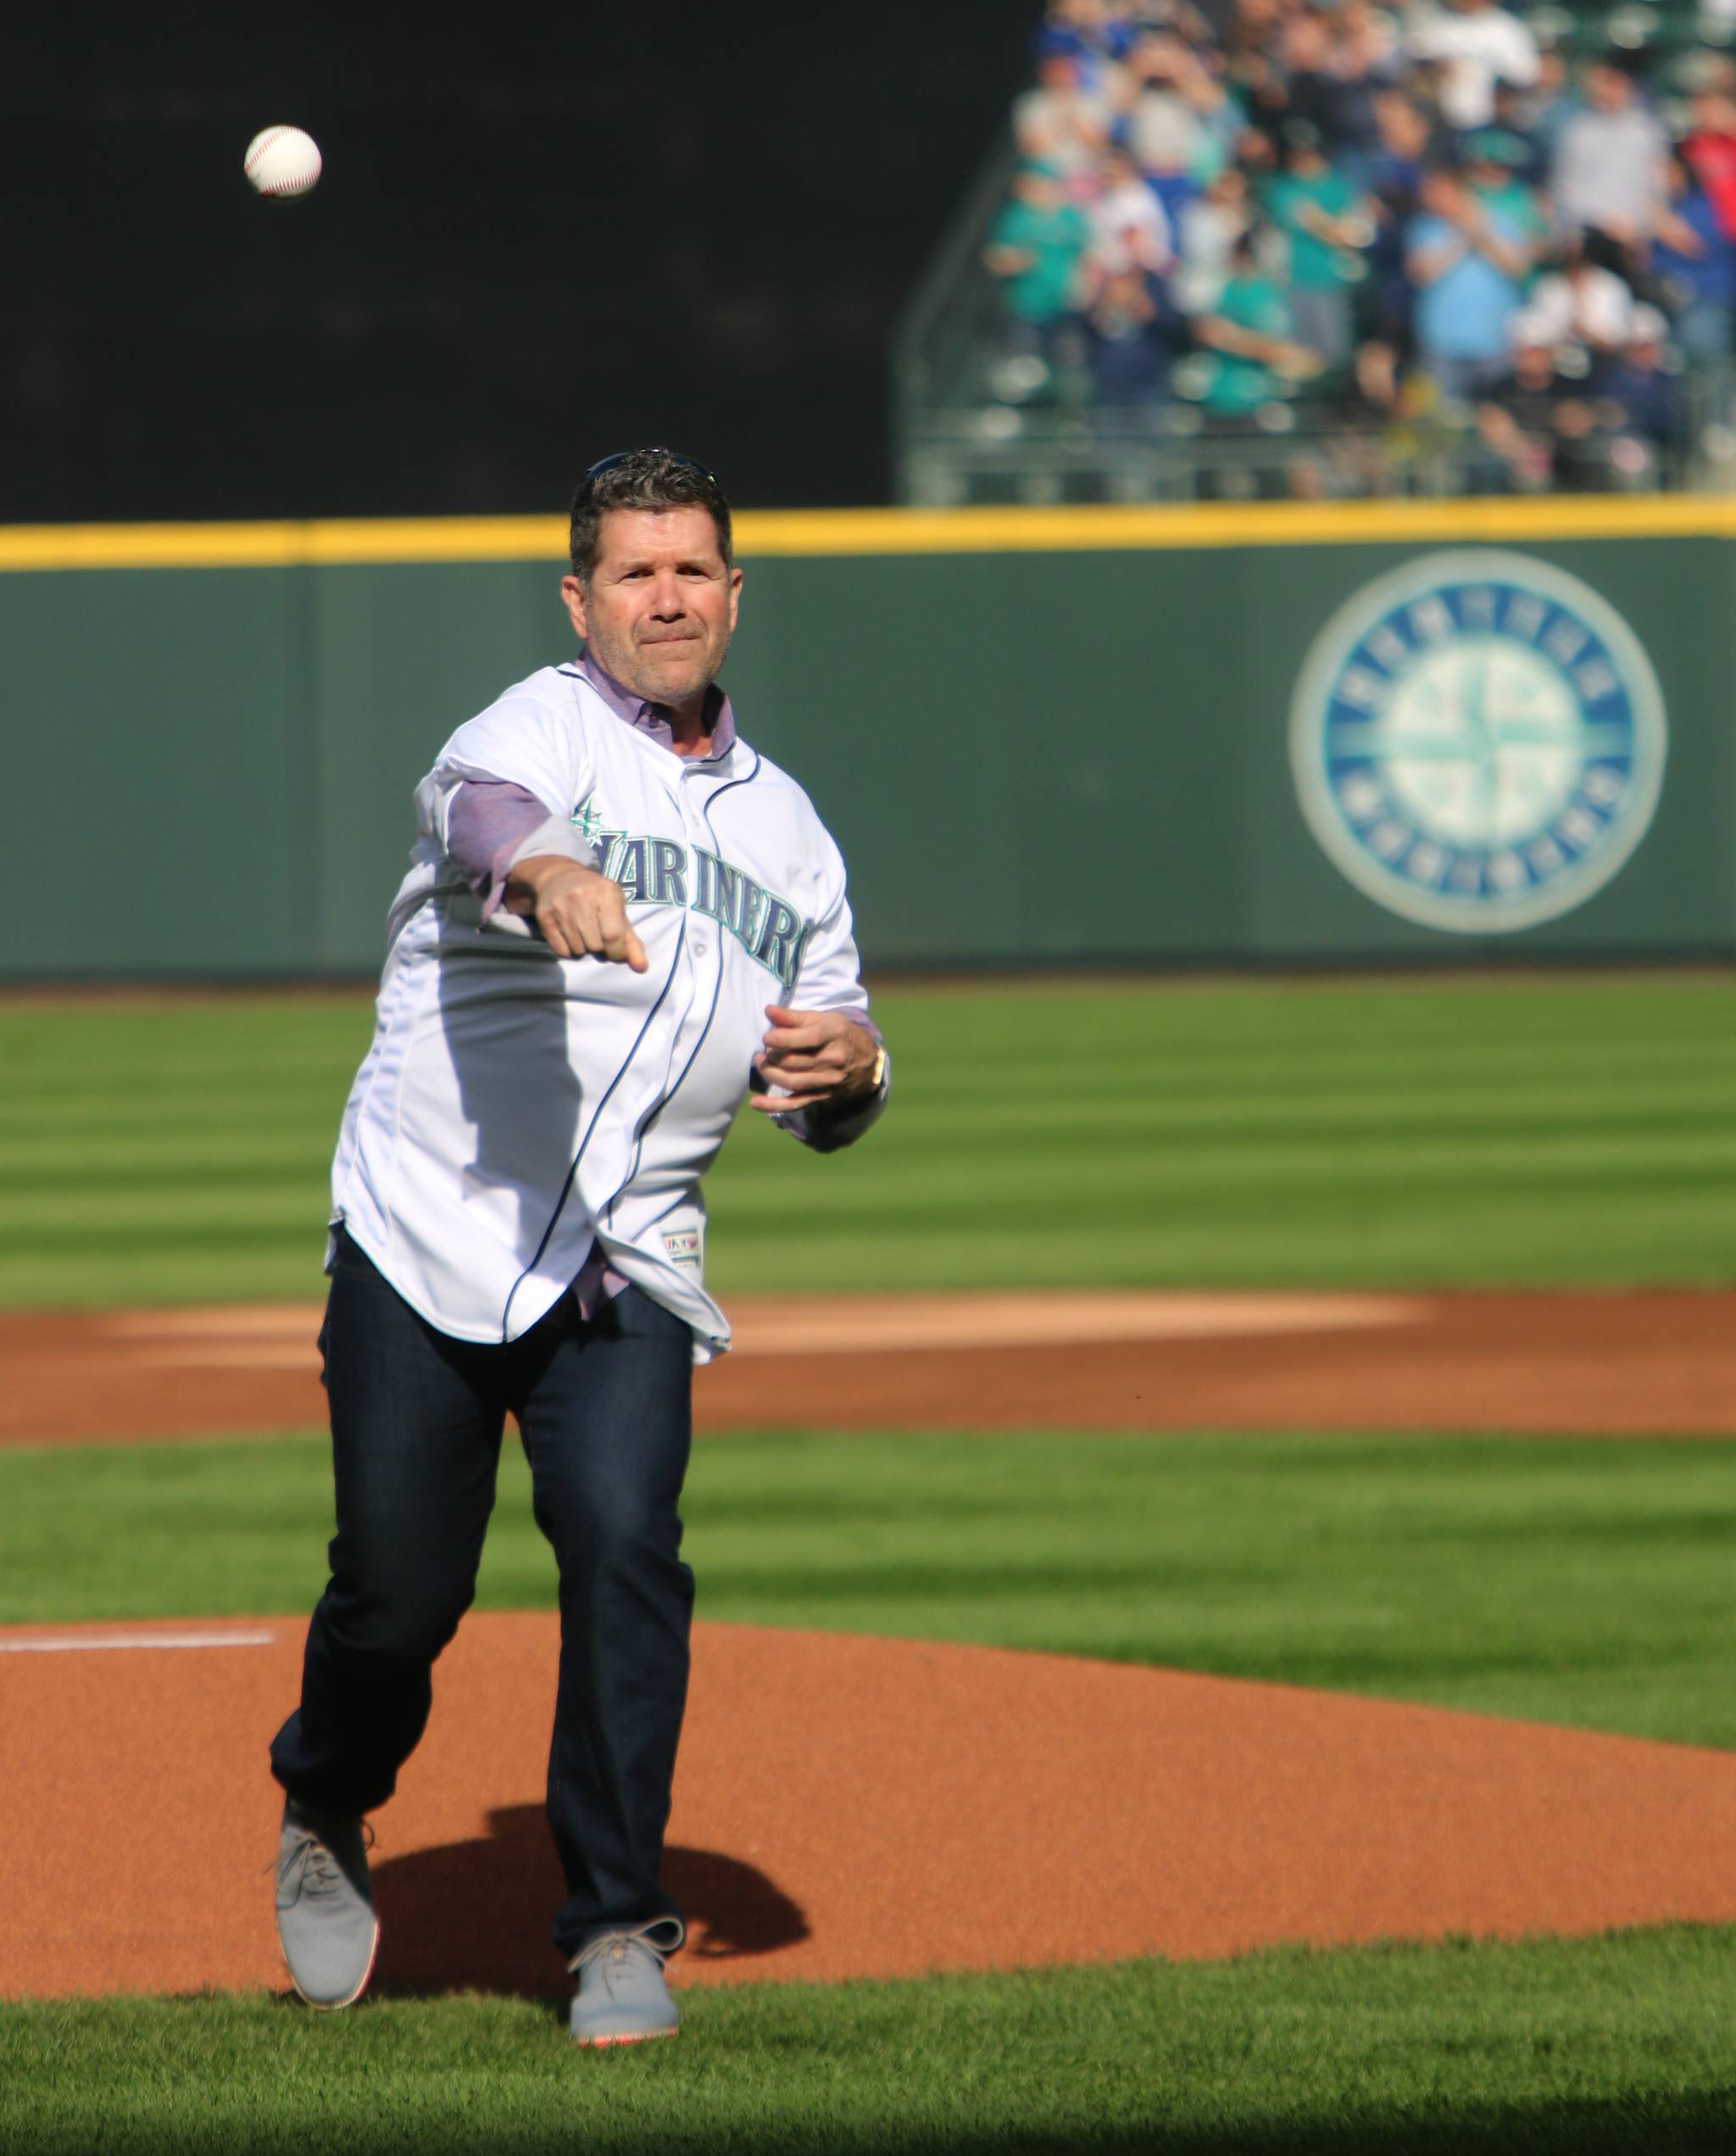 Edgar Martinez throws out the first pitch for the Mariners game on March 28. Andy Nystrom / staff photo